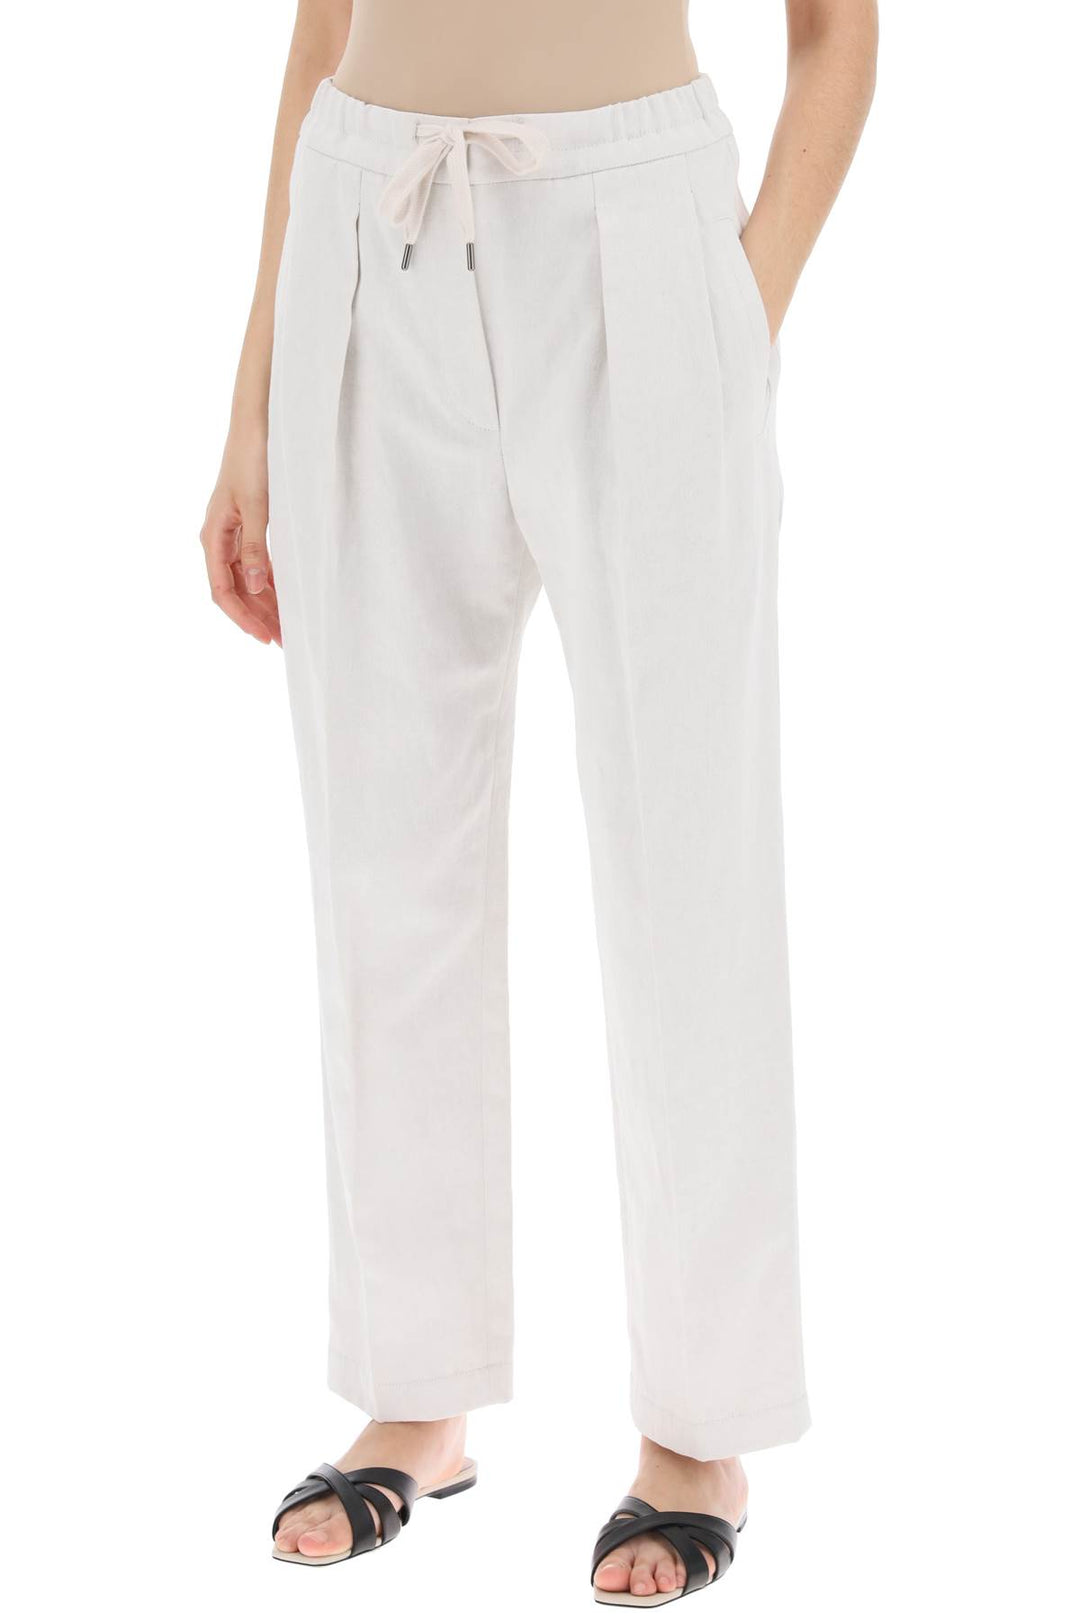 Brunello Cucinelli Cotton And Linen Slouchy Pants   White